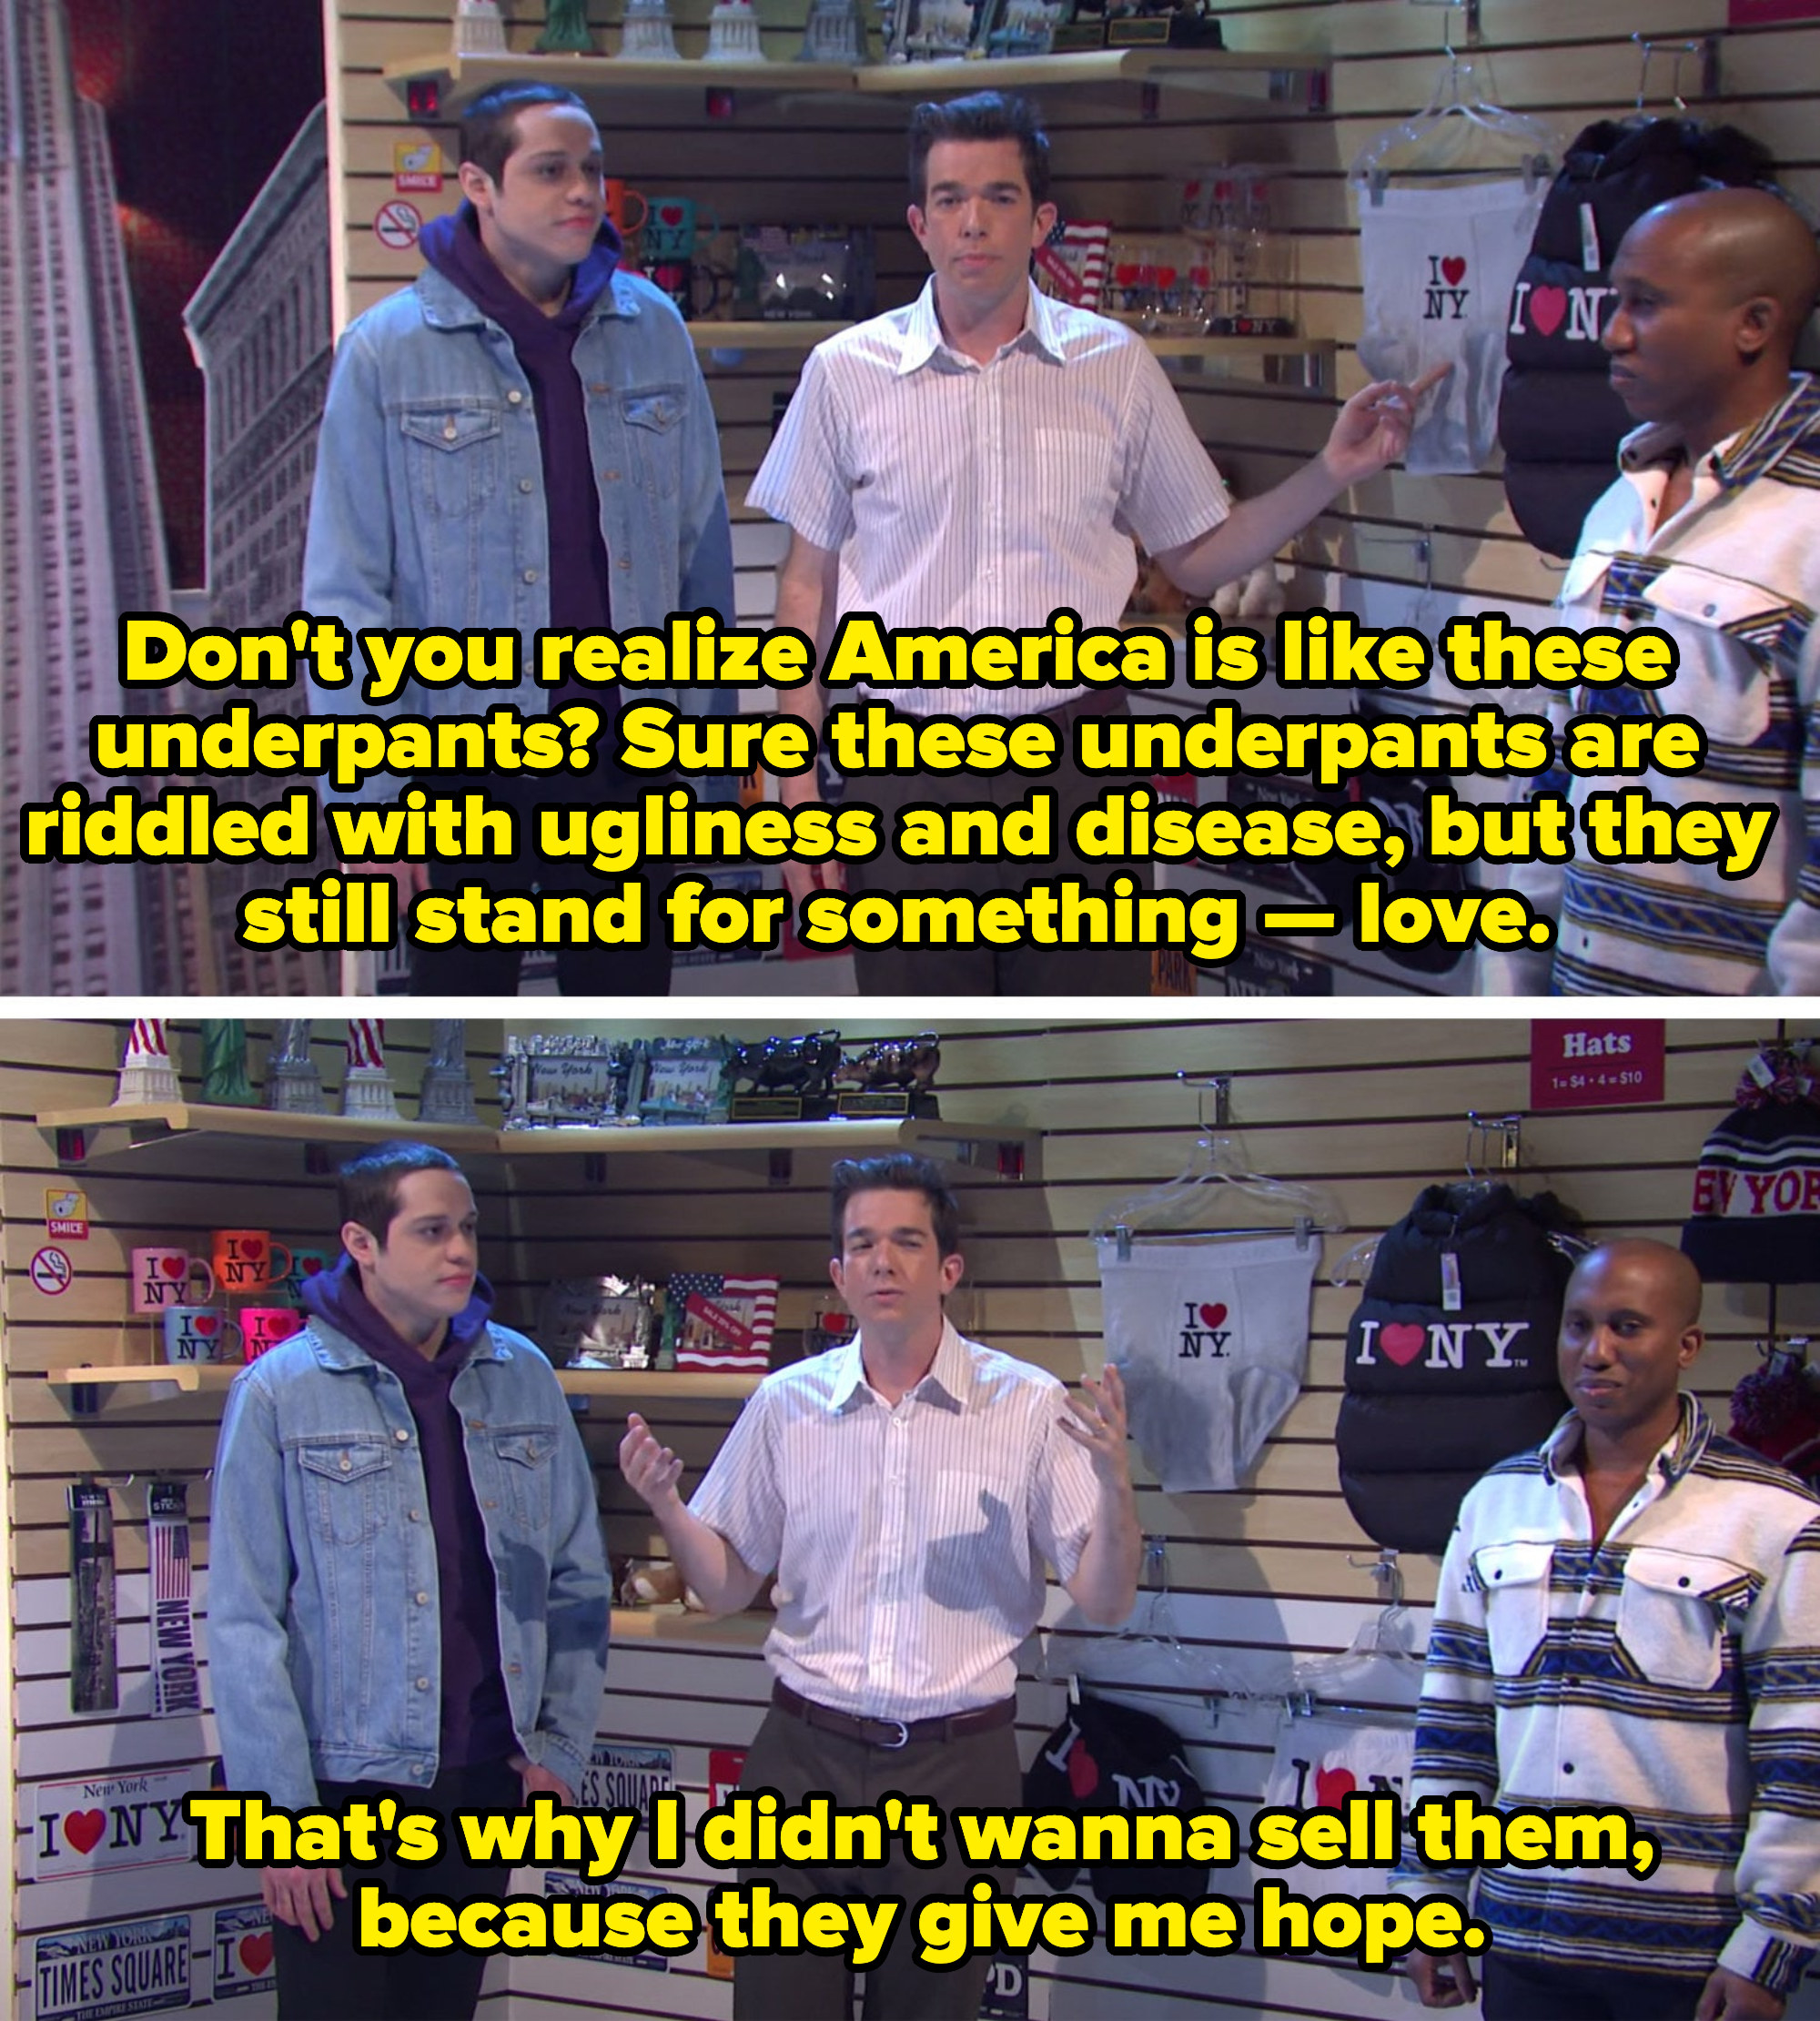 John comparing America and the underwear because both are ugly and full of disease but stand for love.